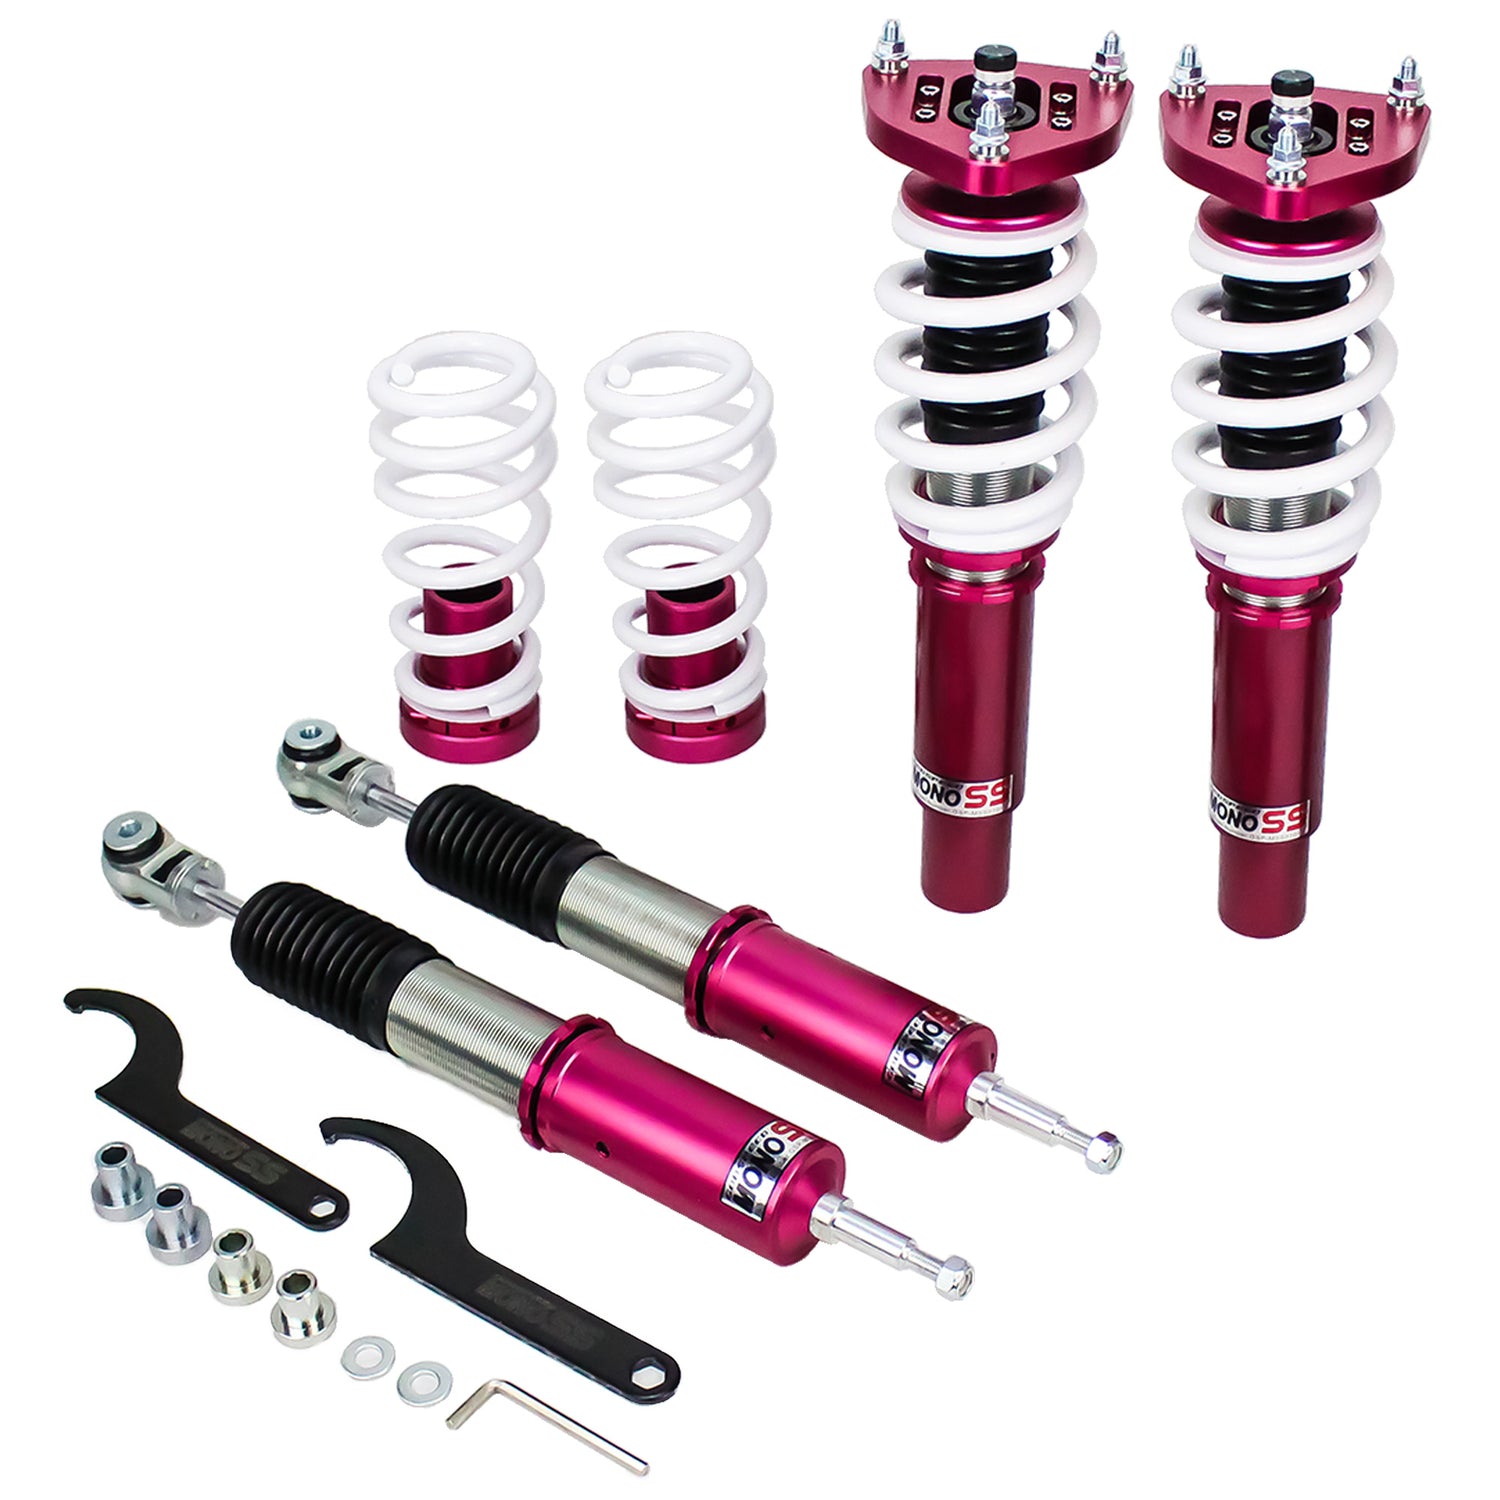 Godspeed MSS0105-B MonoSS Coilover Lowering Kit, Fully Adjustable, Ride Height, Spring Tension And 16 Click Damping, Volkswagen Golf TDI(MK7) FWD 2015+UP